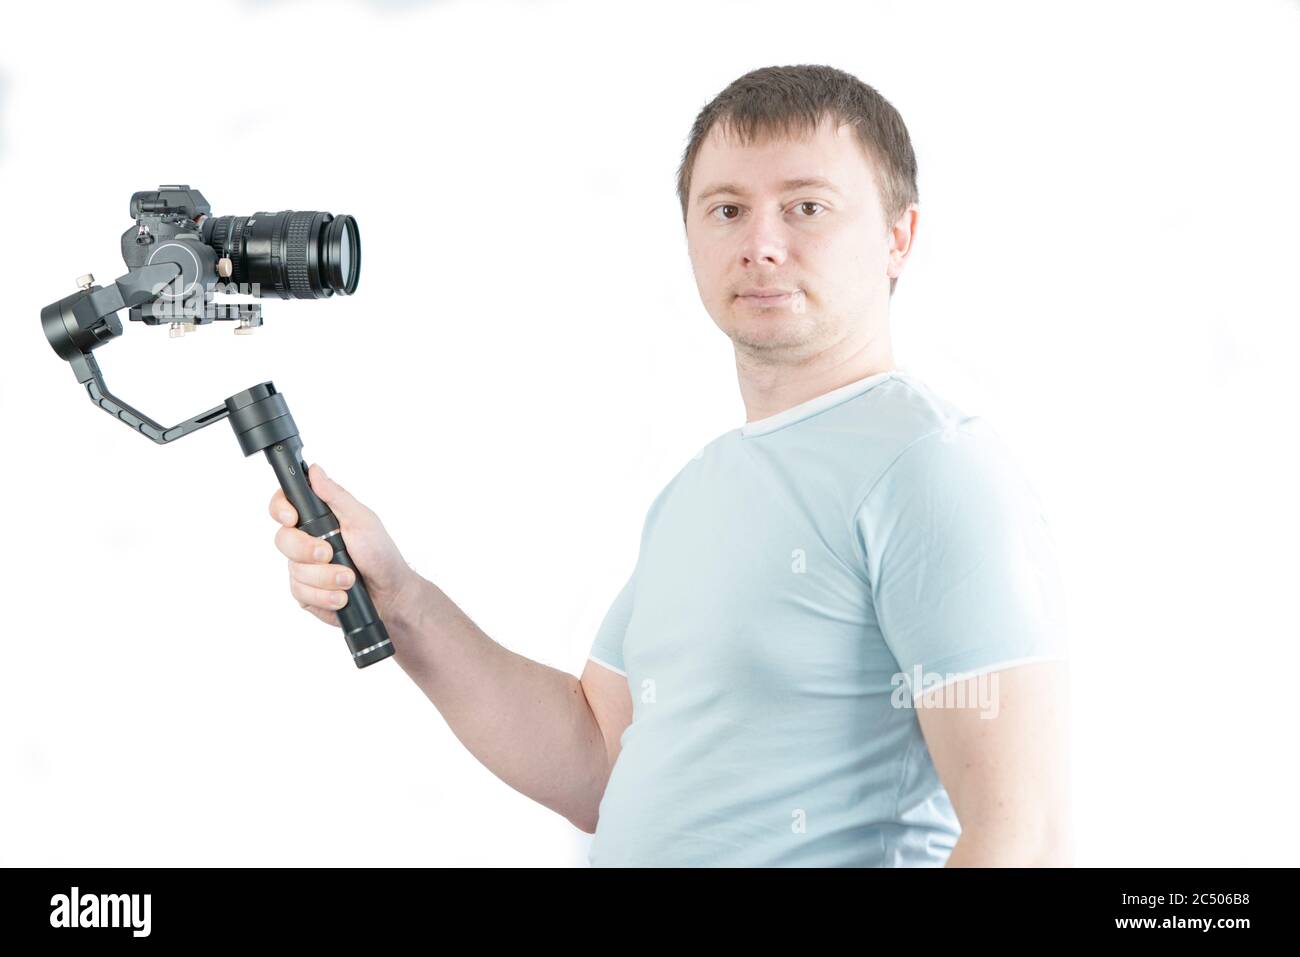 The guy holds a 3-axis stabilizer with a camera in his hand, takes a selfie video. Stock Photo